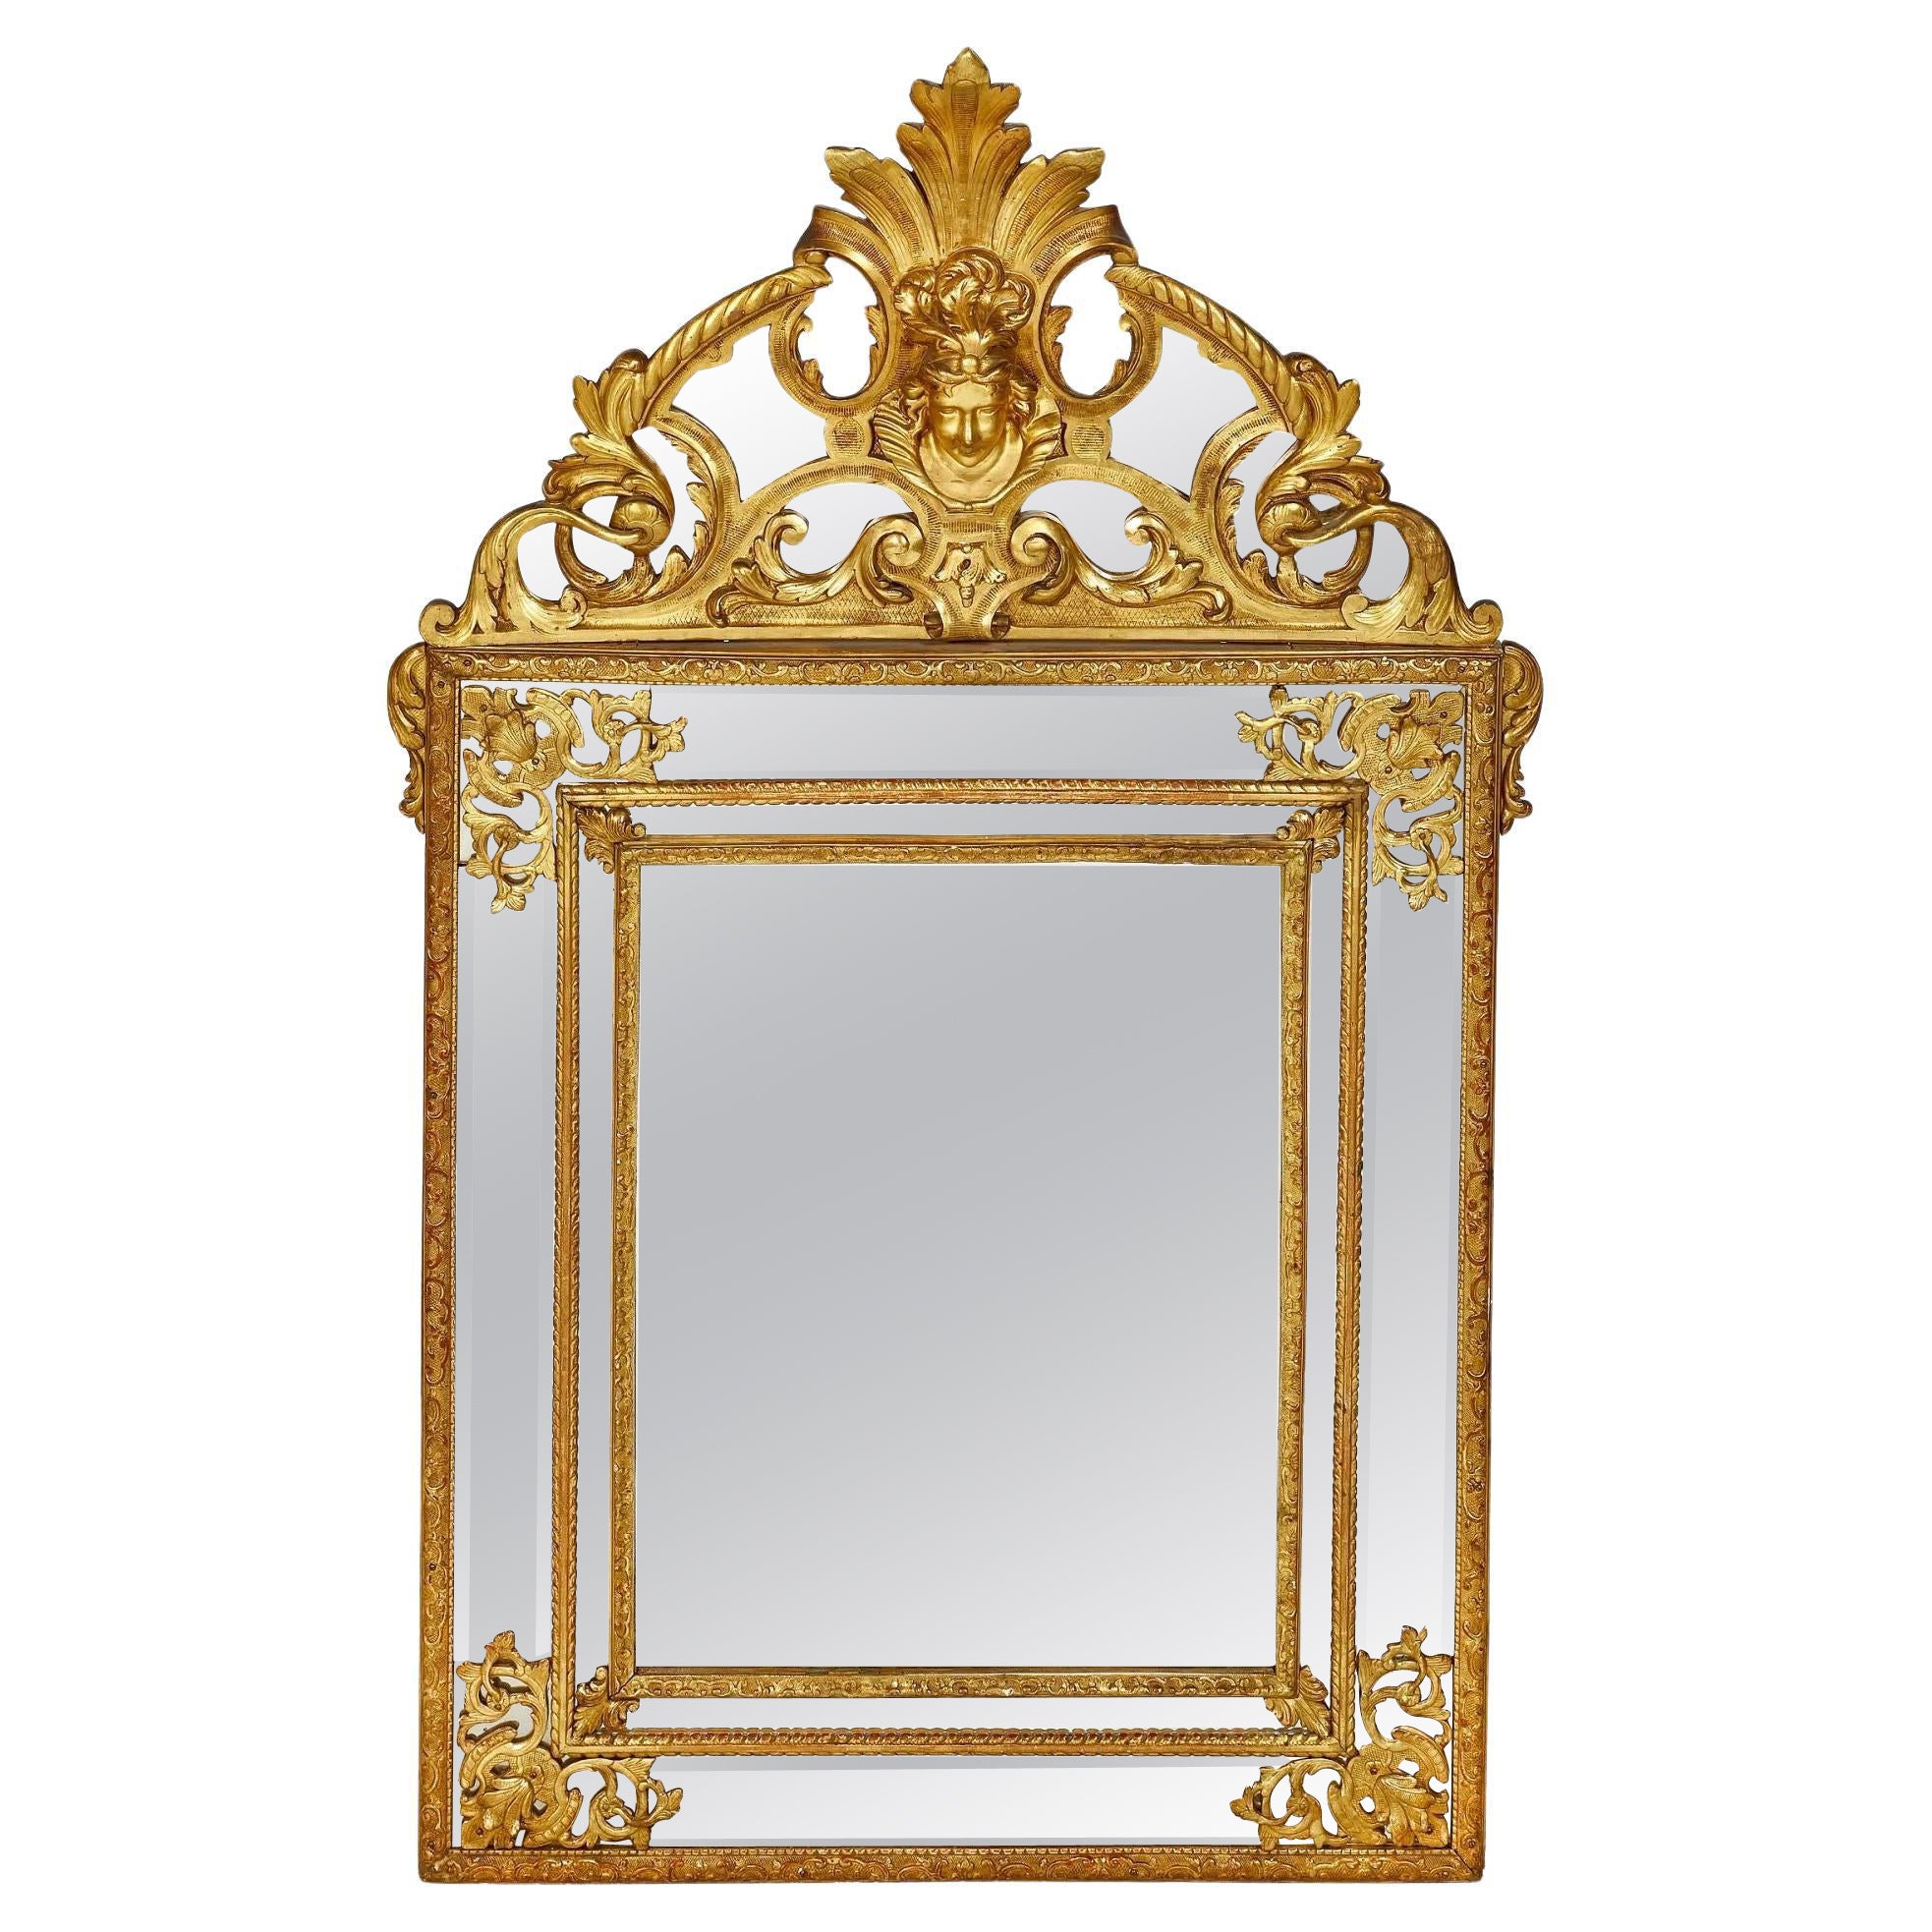 19th Century English Regency Style Carved Giltwood Mirror